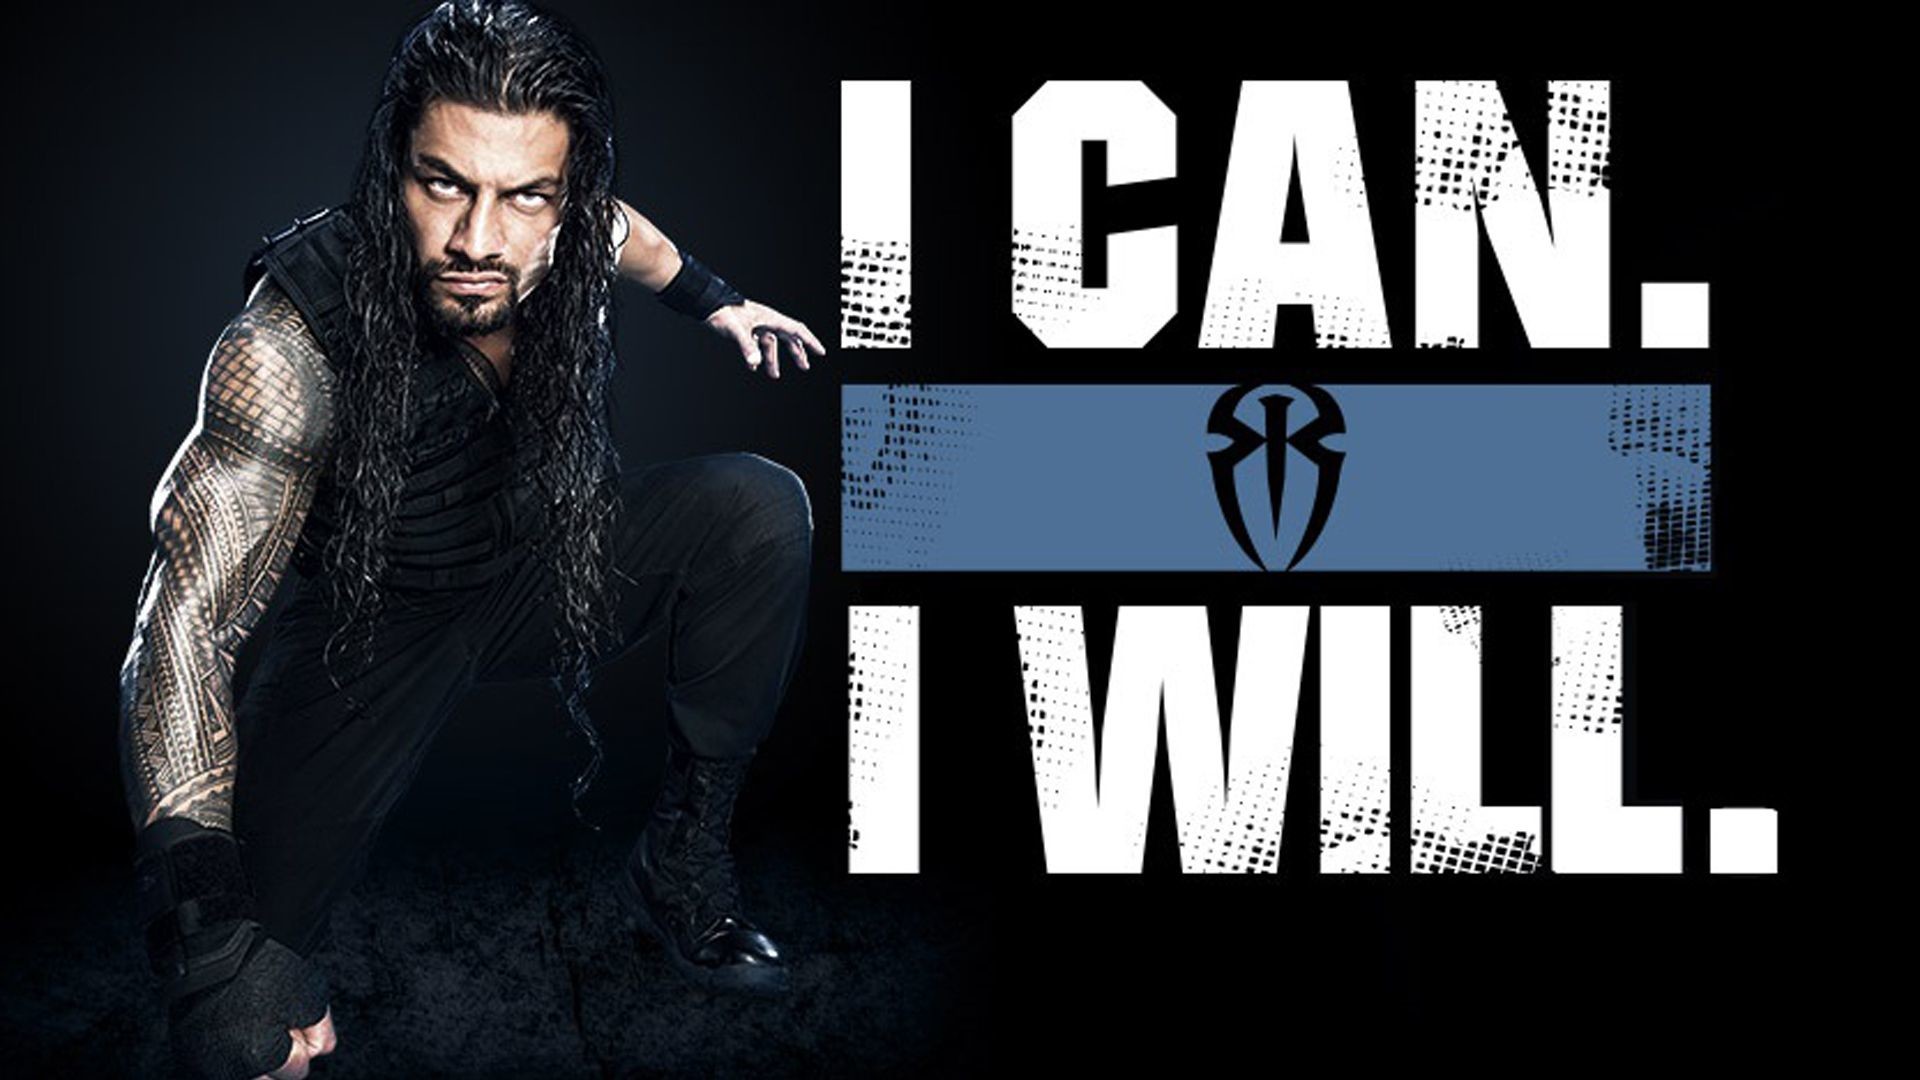 Gallery For 4826658: WWE Wallpapers, 1920×1080